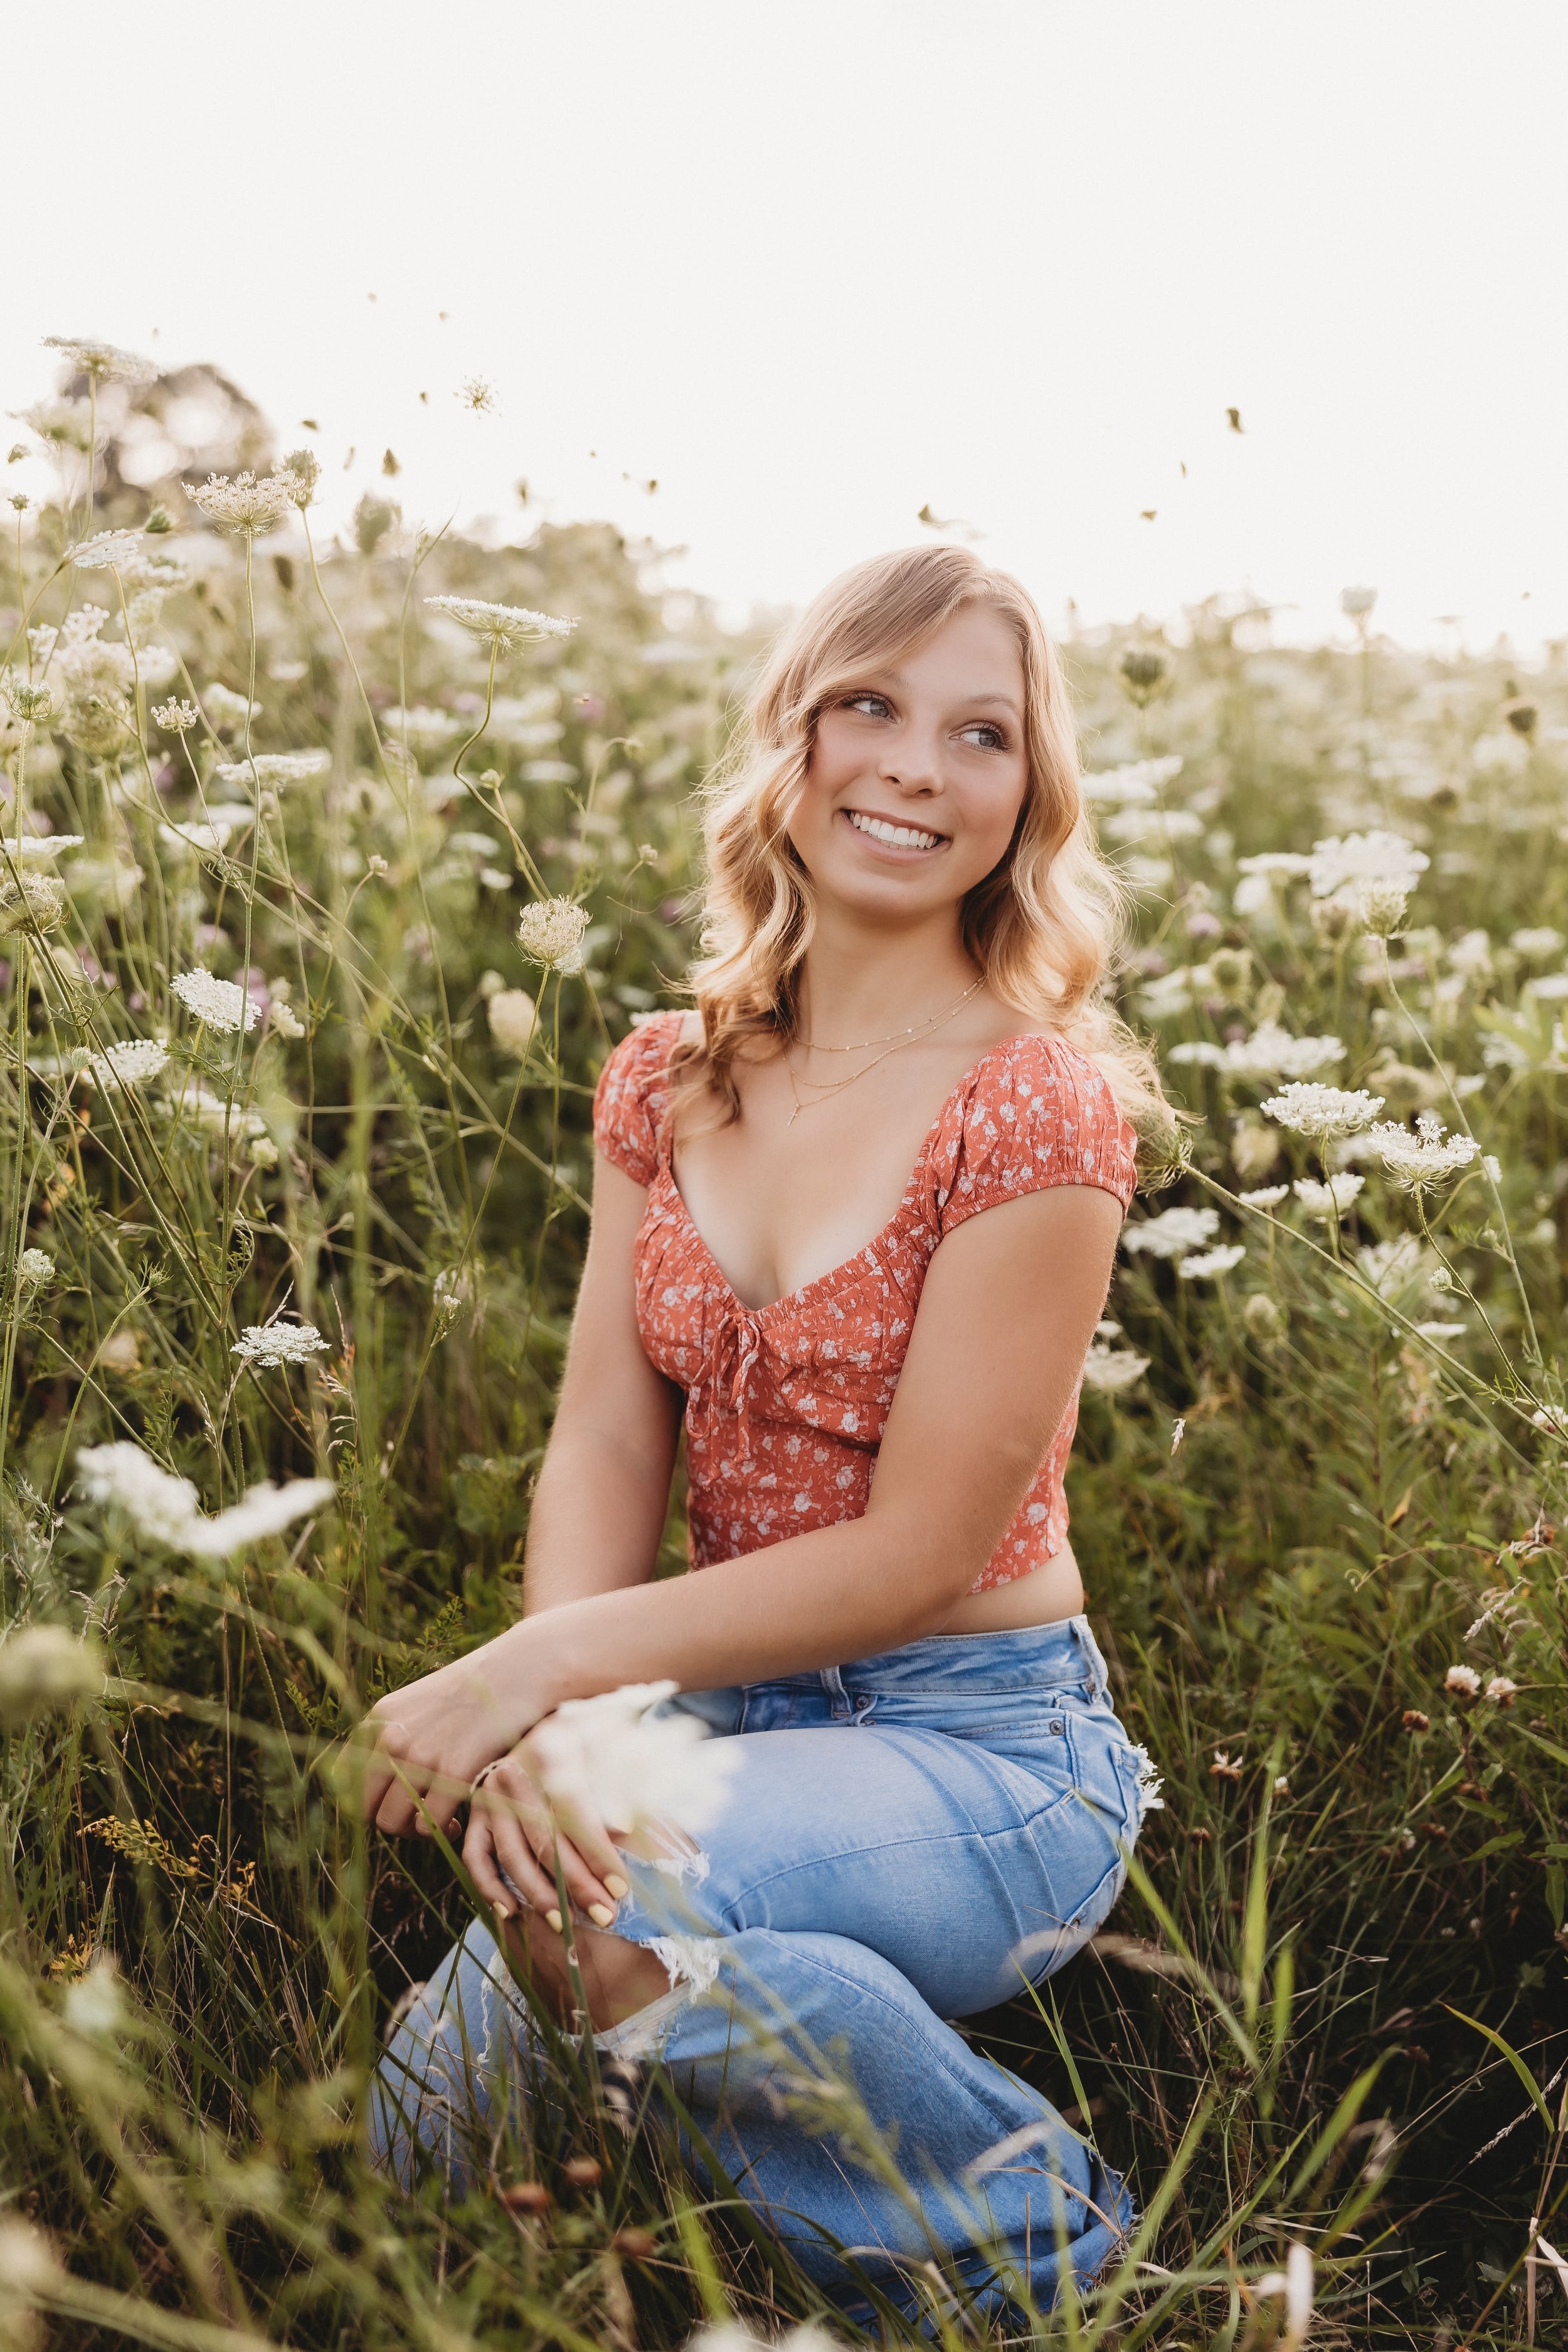  addie’s senior photographer near me captured her smiling and looking to the side in a field of wildflowers 